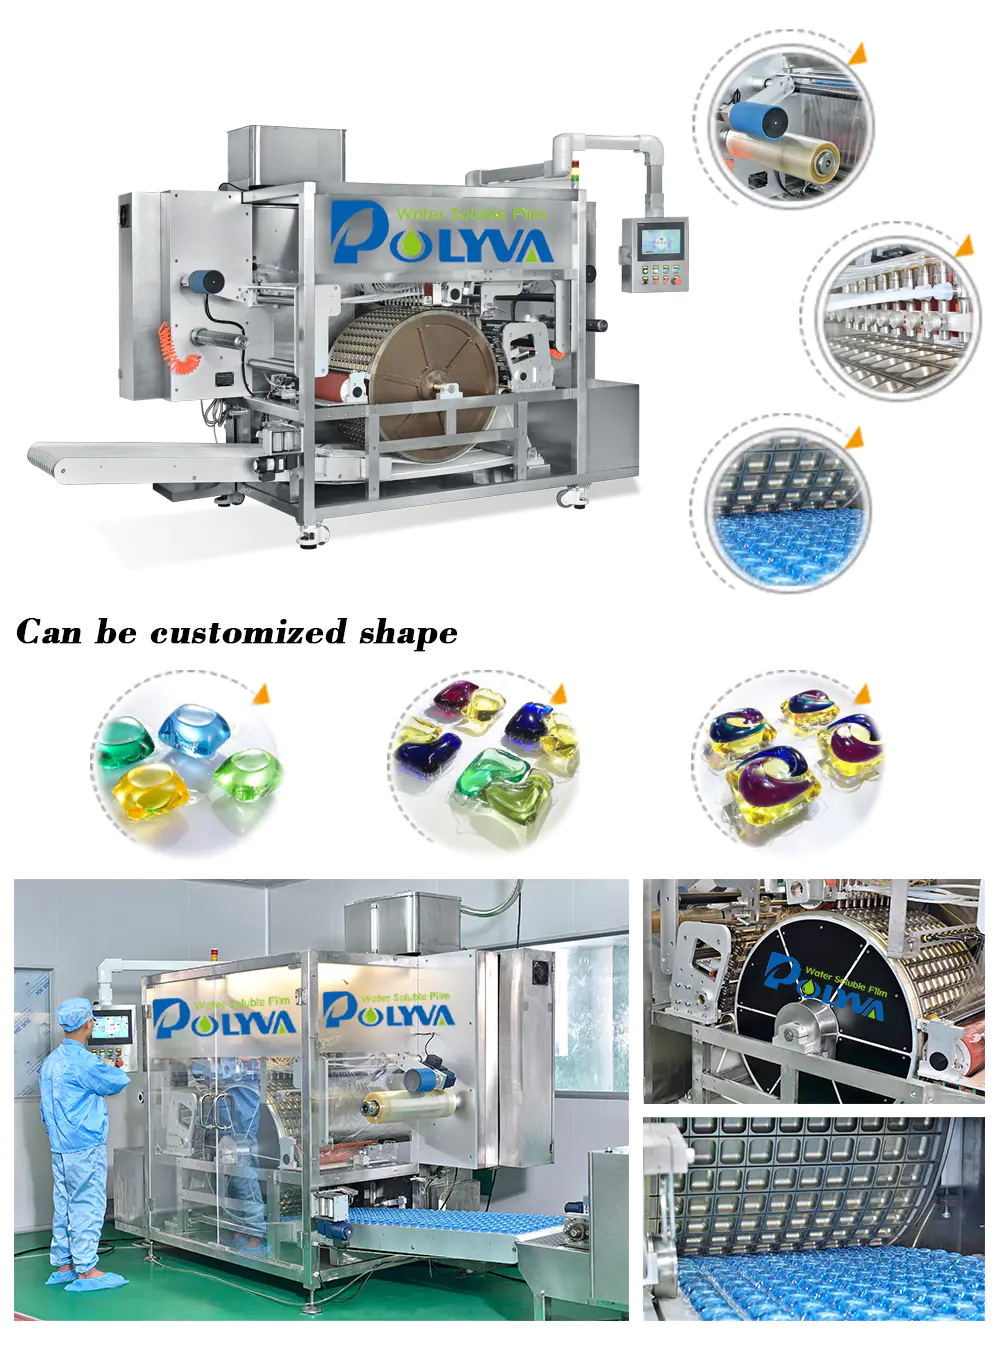 POLYVA water soluble film packaging personalized for powder pods